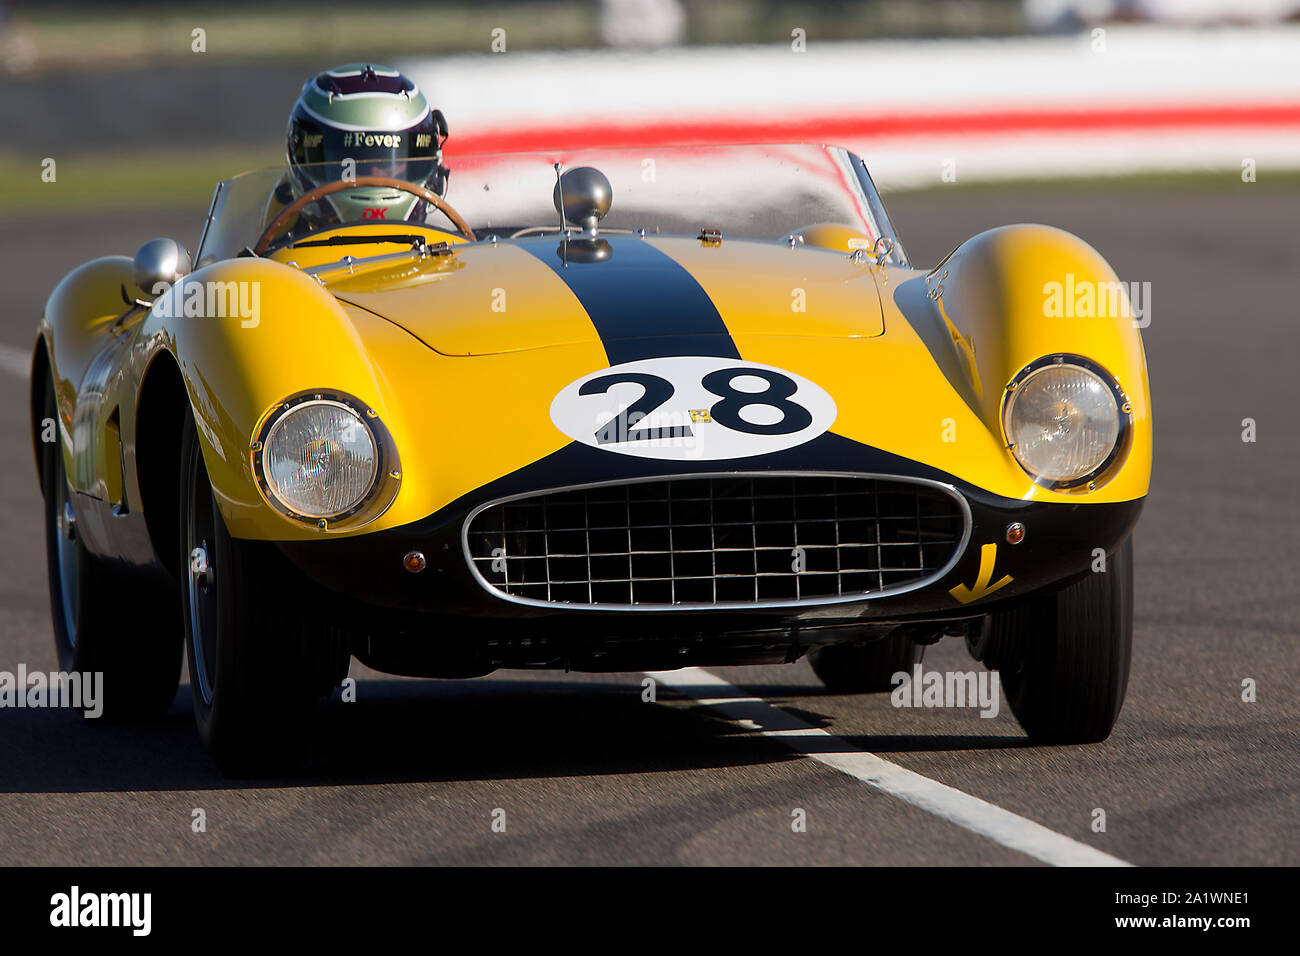 1957 Ferrari 500 TRC driven by James Cottingham in the Freddie March Memorial Trophy at The Goodwood Revival 14th Sept 2019 in Chichester, England.  C Stock Photo